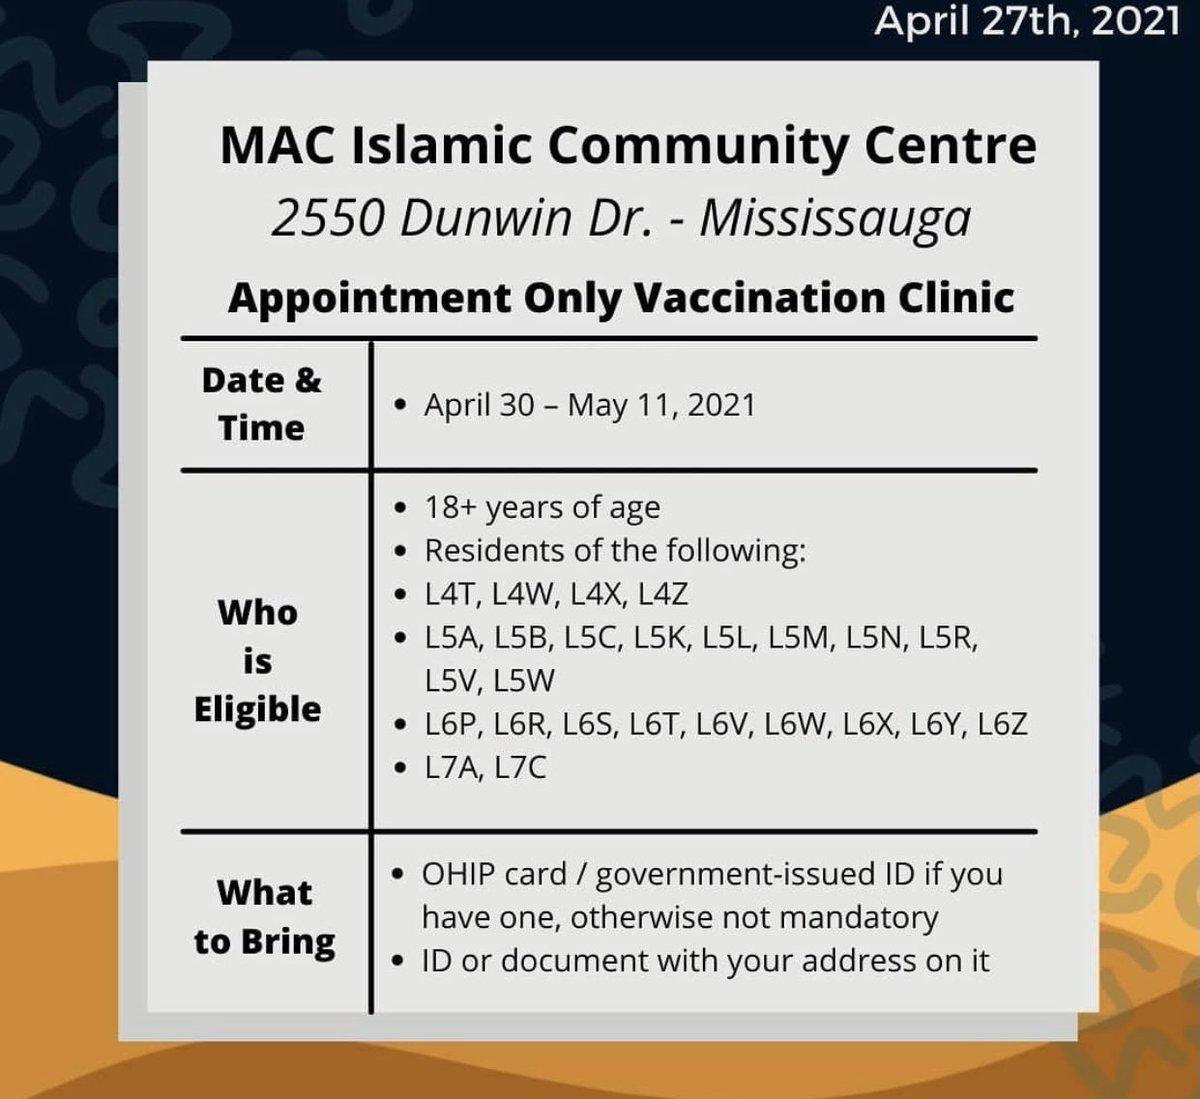 We are also launching 18+ Community and Mobile Pop-Up clinics across Peel. Starting April 30 to May 11, residents 18+ within hot spot postal codes will be able to get the vaccine at these Peel Vaxx Pop Ups:  Brampton Islamic Centre  MAC Islamic Community Centre5/6